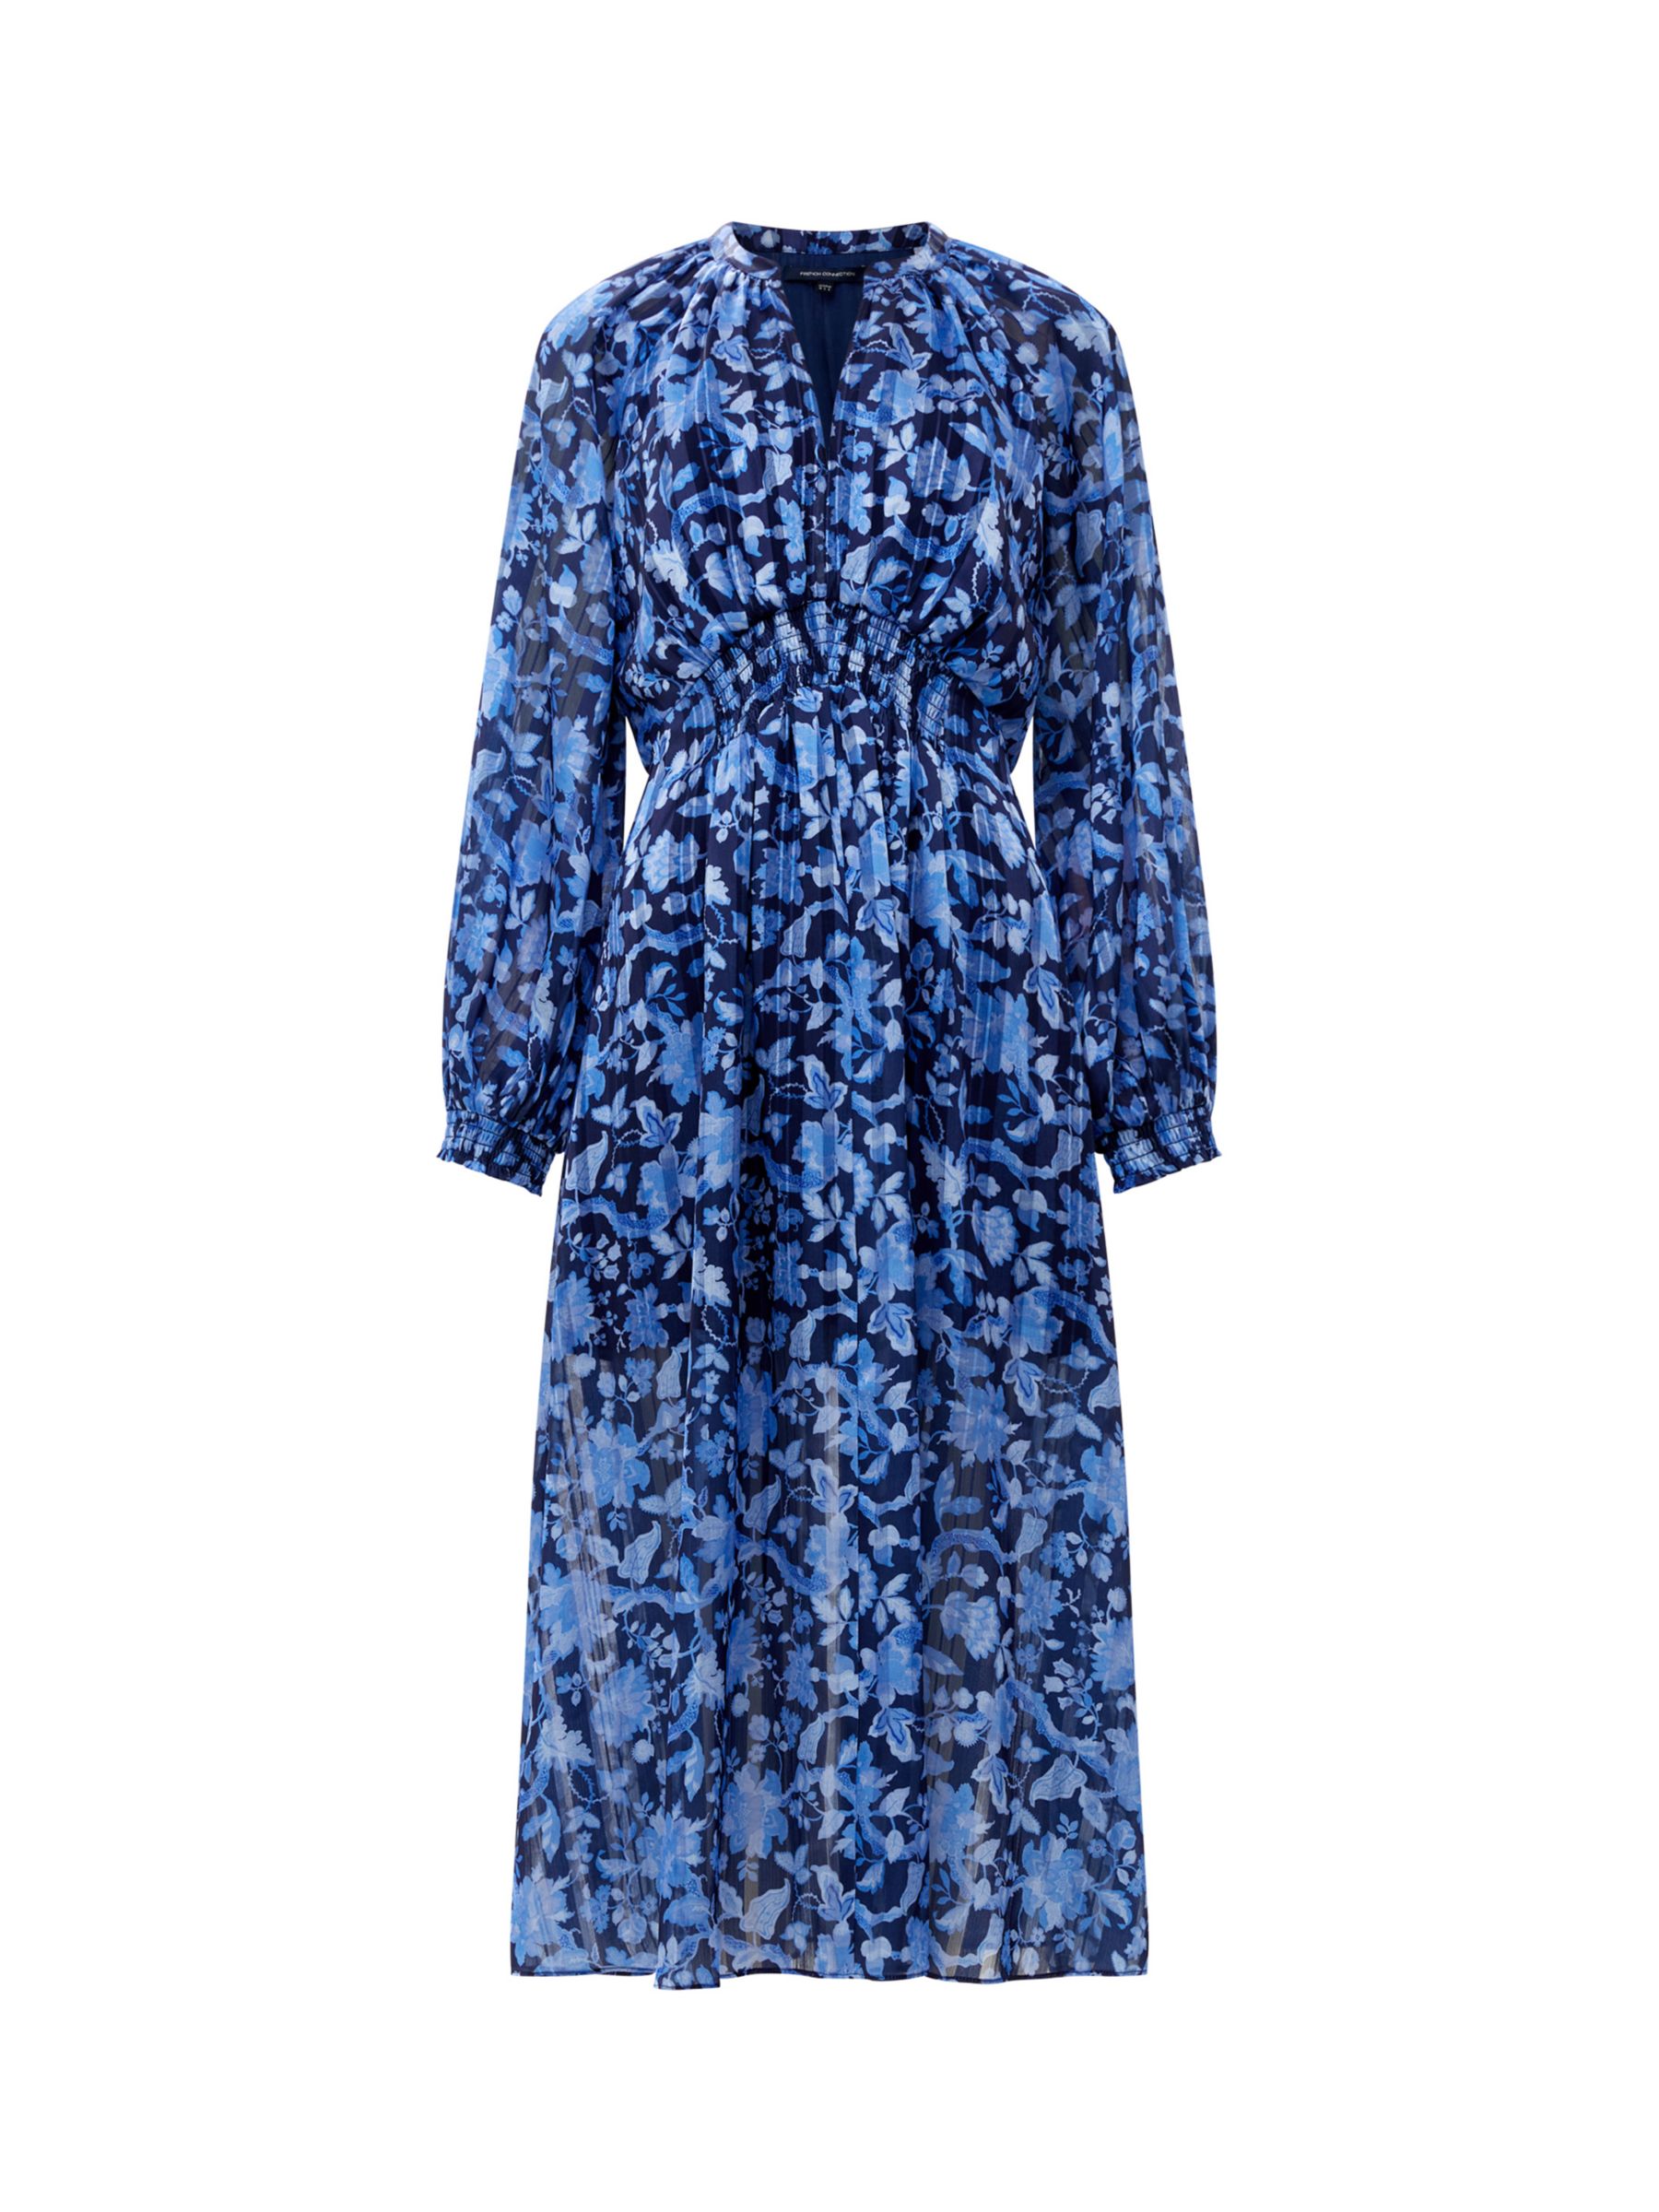 French Connection Cynthia Fauna Dress, Midnight Blue at John Lewis ...